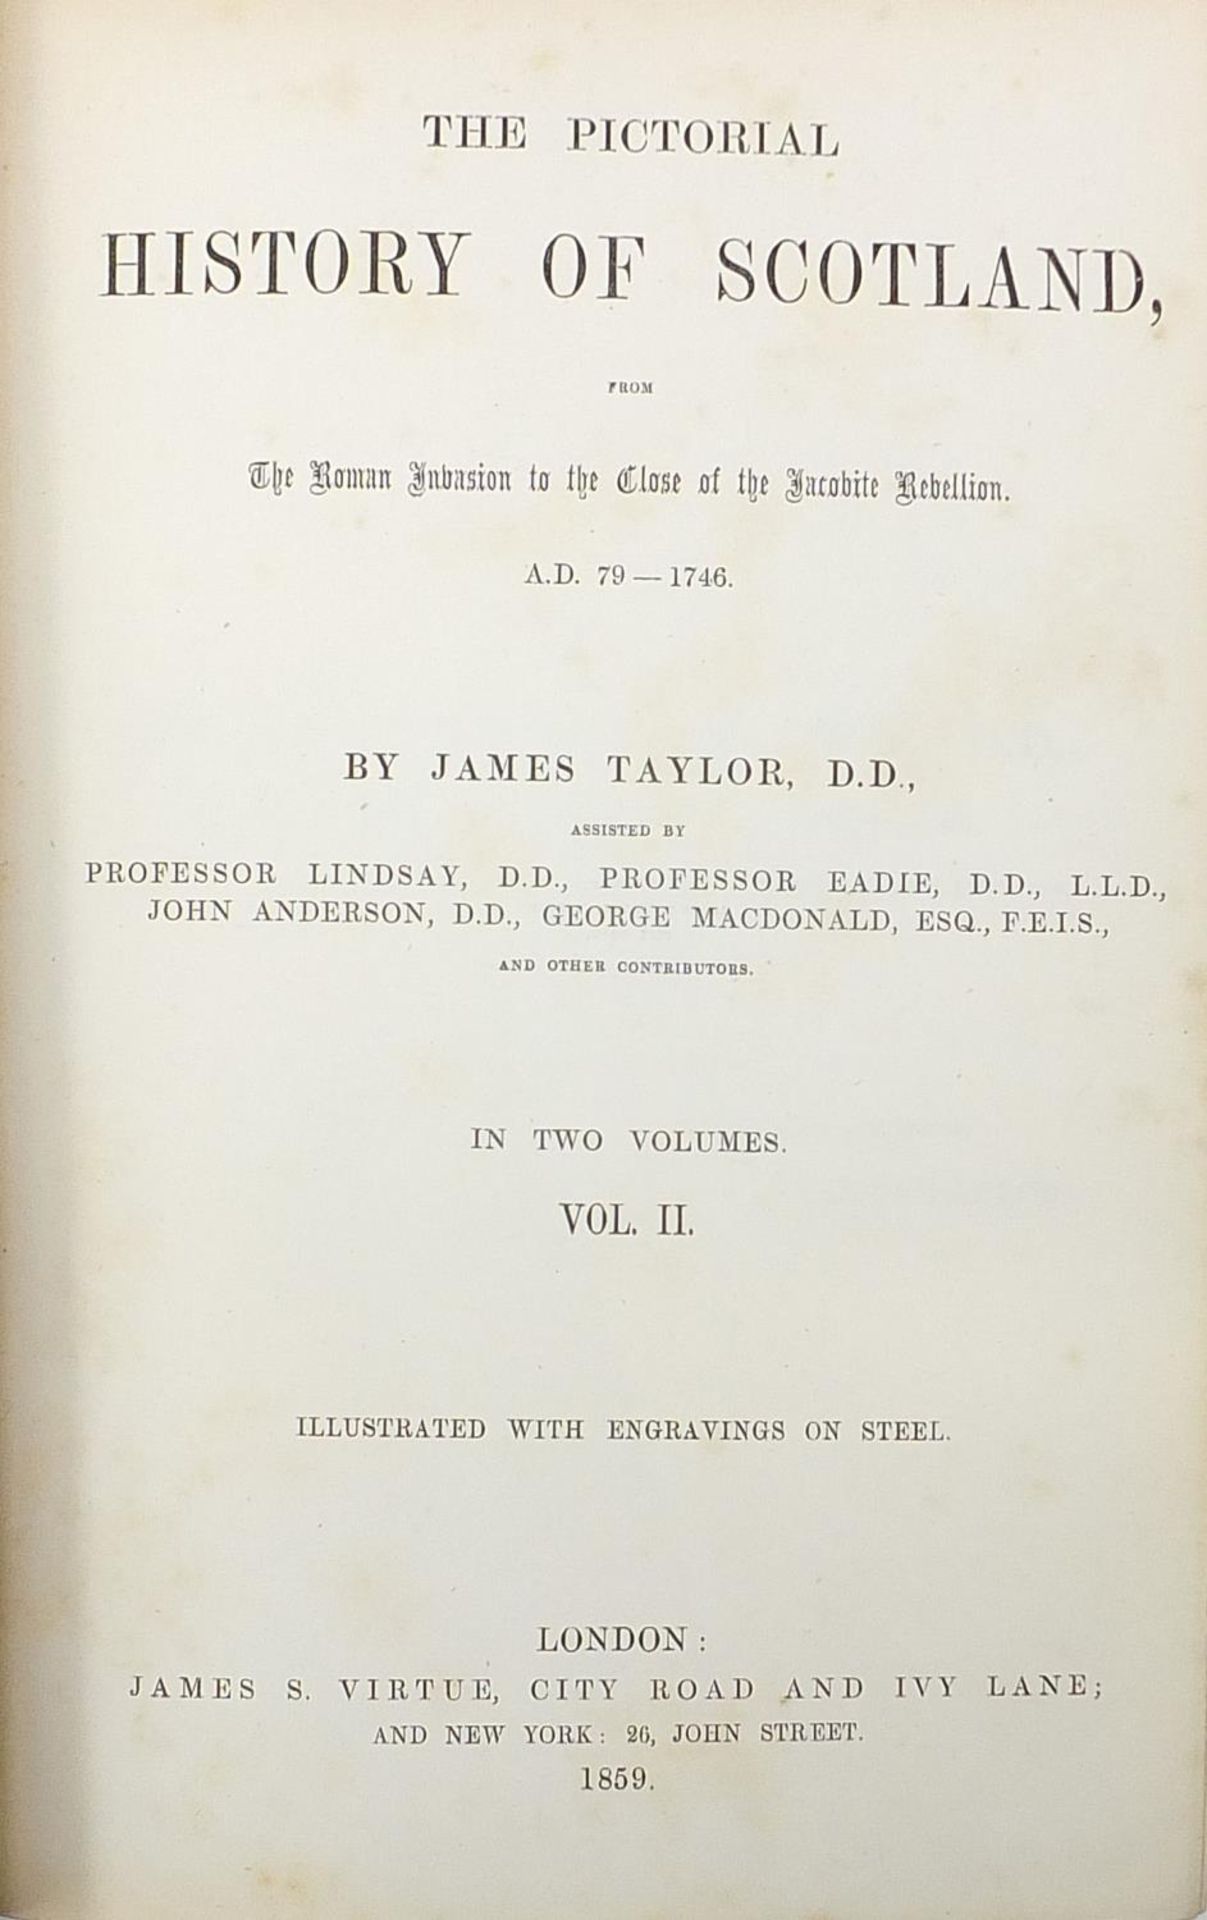 The Pictorial History of Scotland by James Taylor, two 19th century hardback books volumes one and - Image 3 of 8